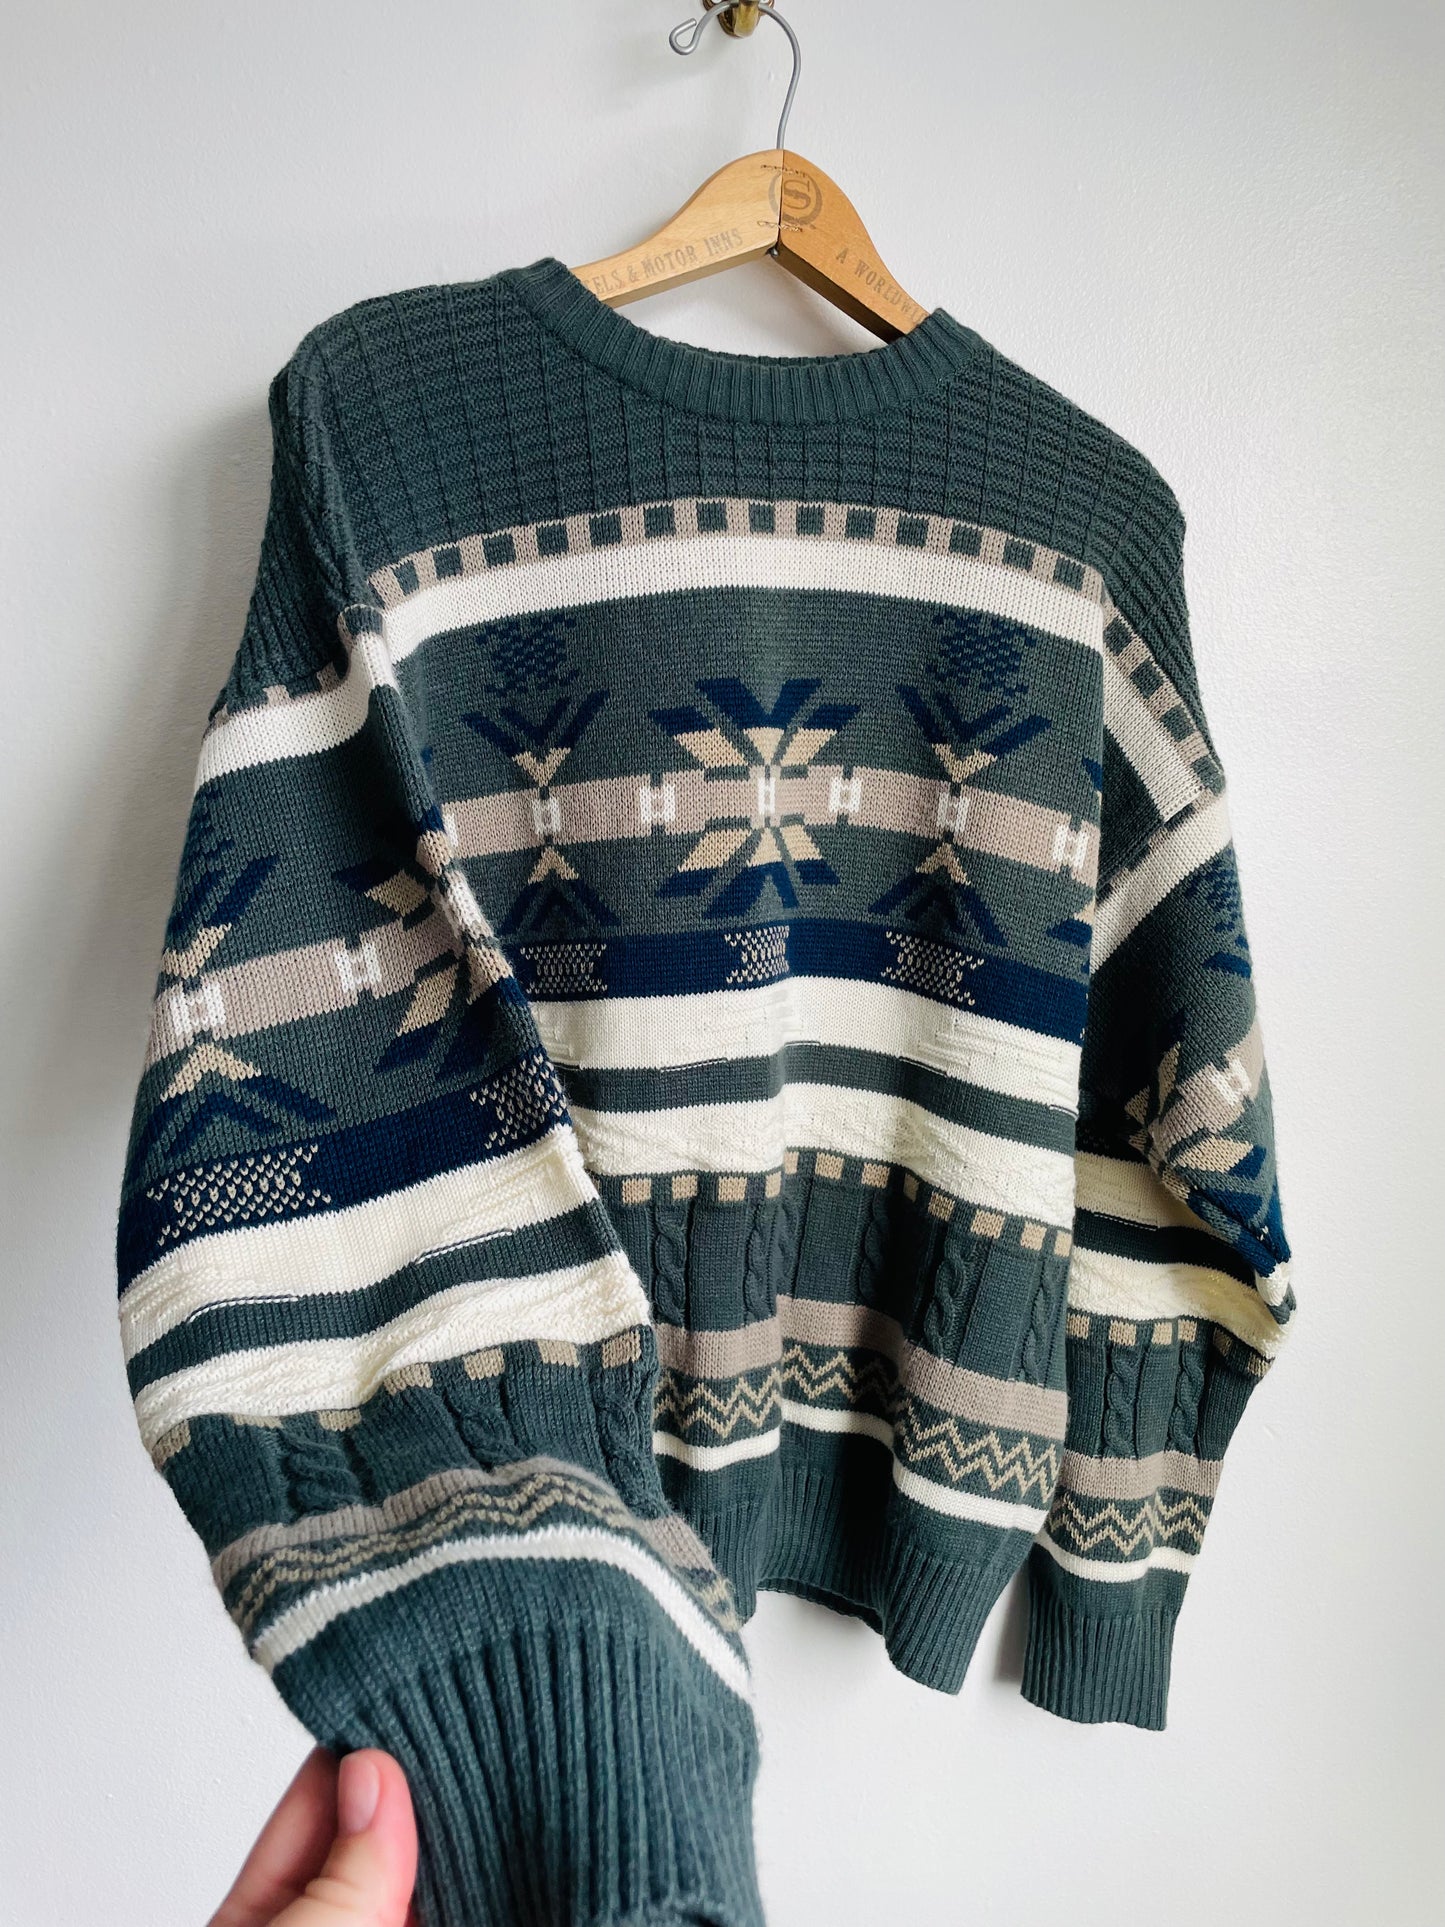 Northwest Territory Knit Sweater with Snowflake Design - Size Medium - Made in Bulgaria